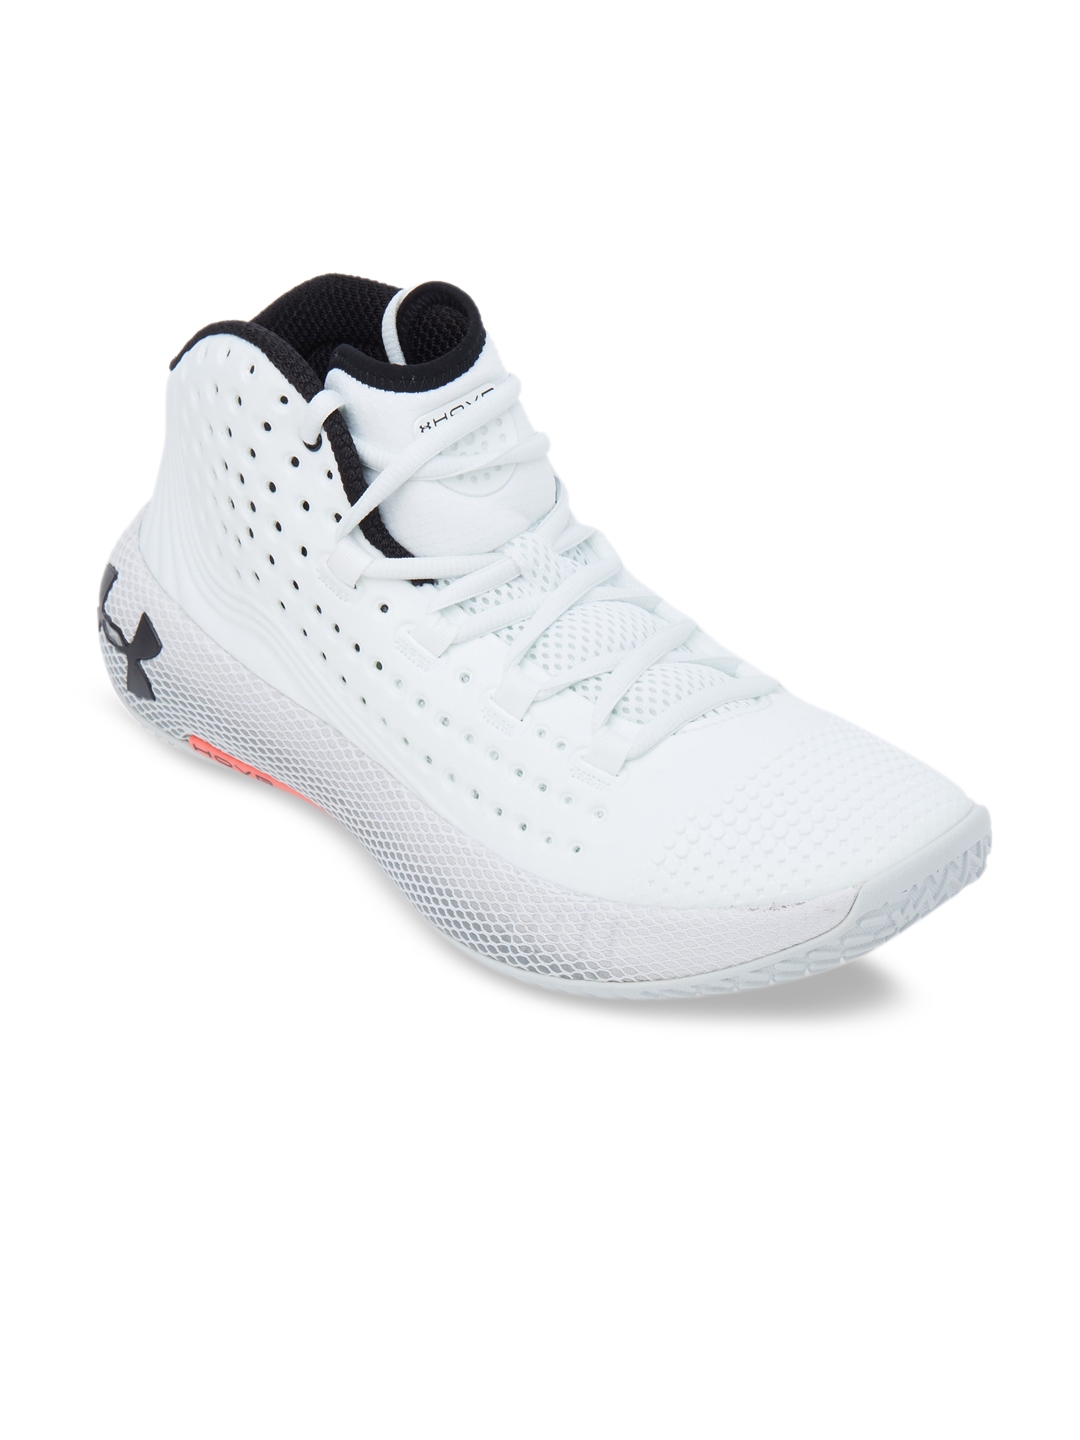 Buy UNDER ARMOUR Men White Mesh Mid Top Hovr Havoc 2 Basketball Shoes ...